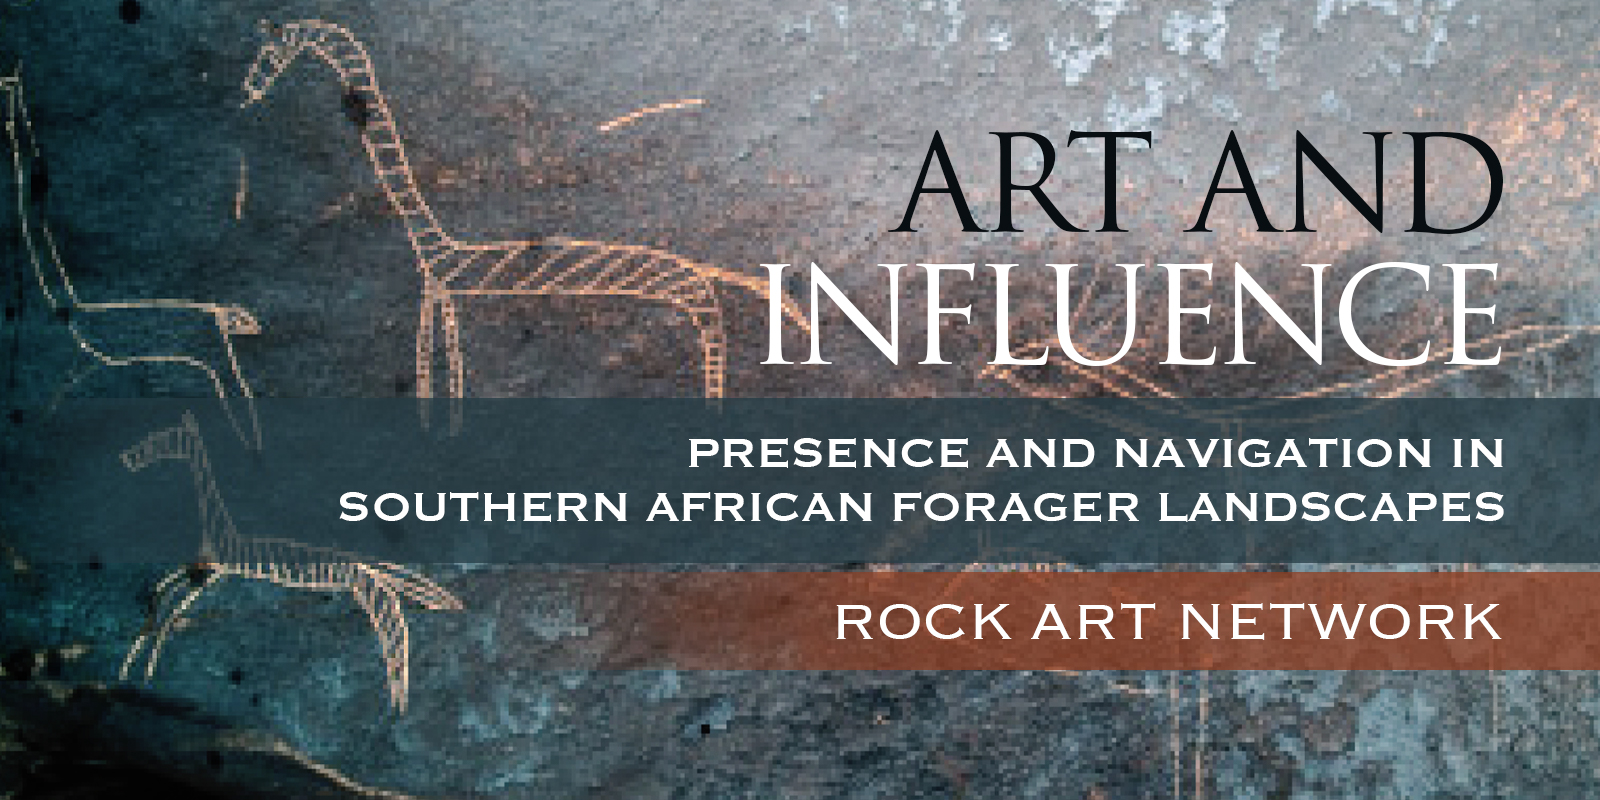 Art and Influence, Presence and Navigation in Southern African Forager Landscapes